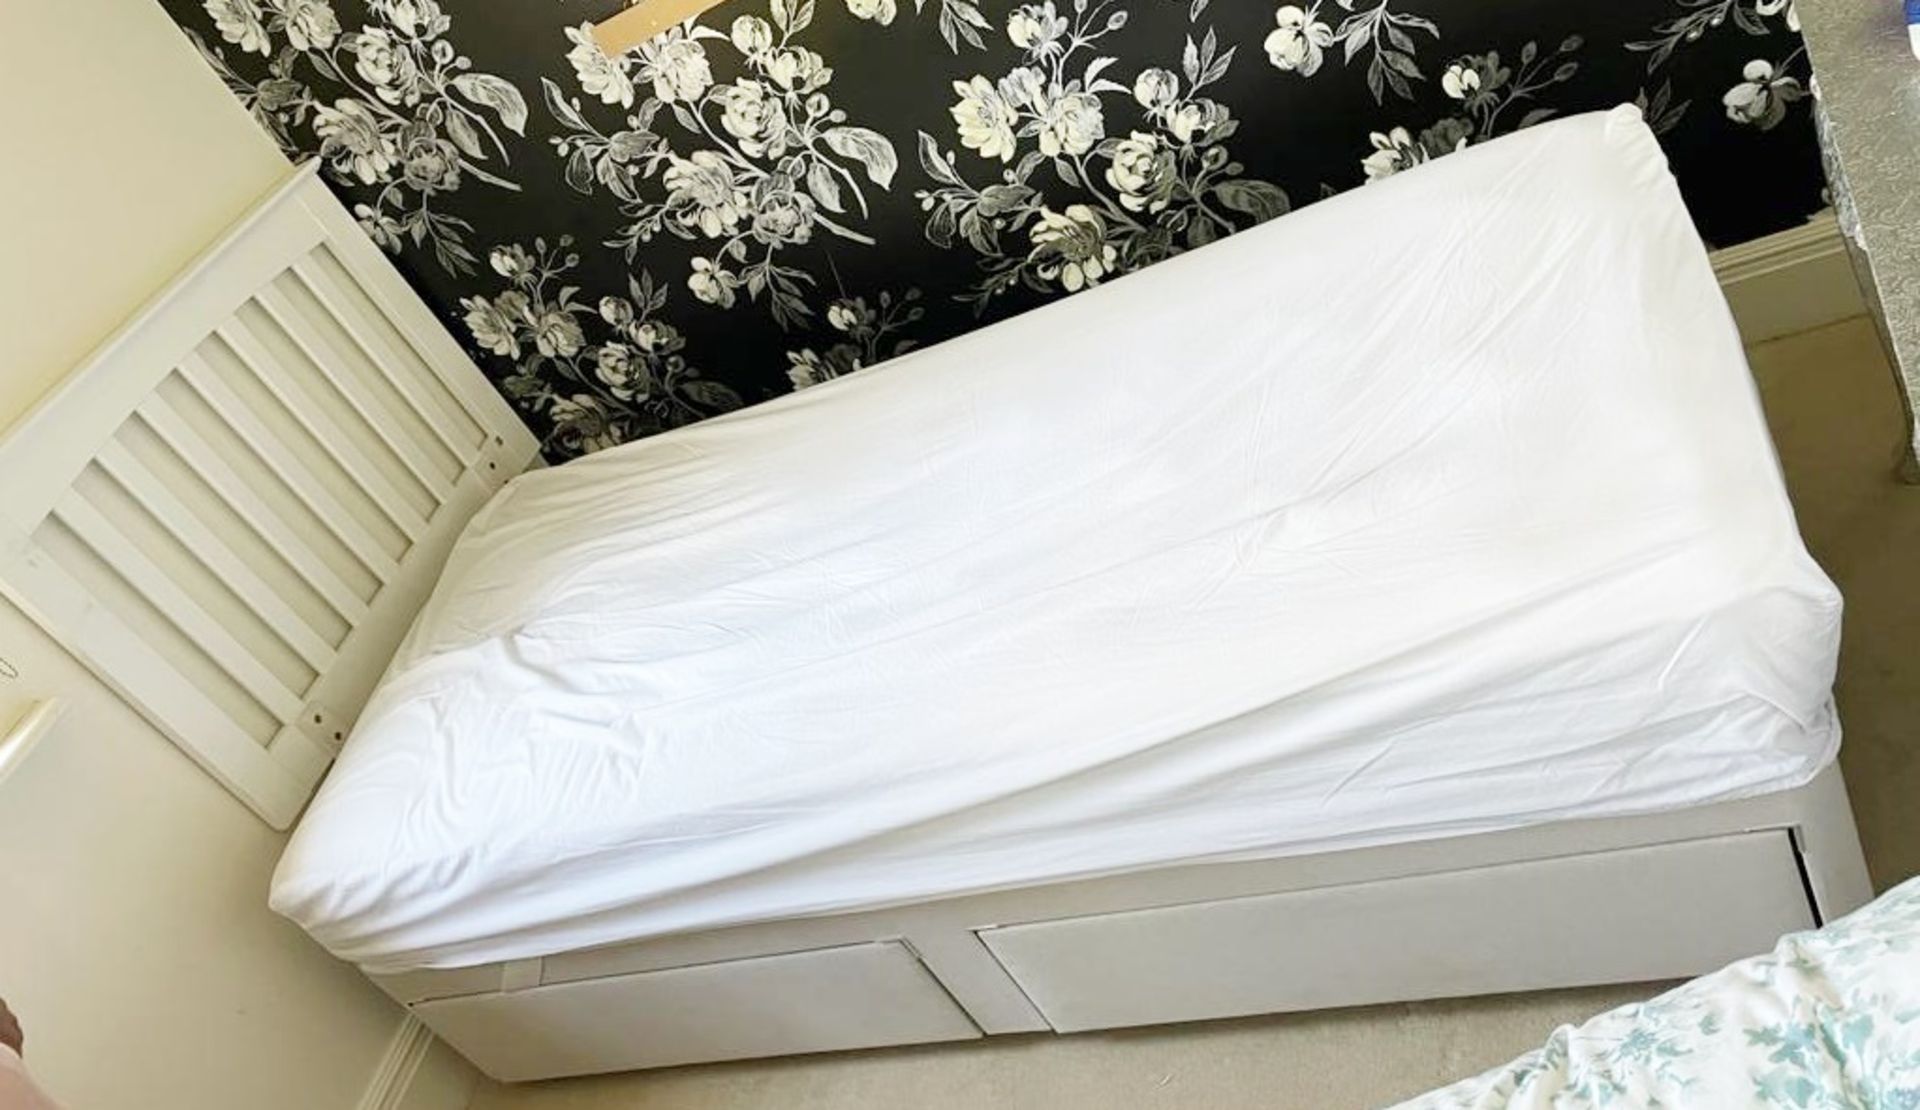 1 x Single Divan Bed With John Lewis Mattress, Headboard and Underbed Storage - CL650 - NO VAT ON TH - Image 2 of 5